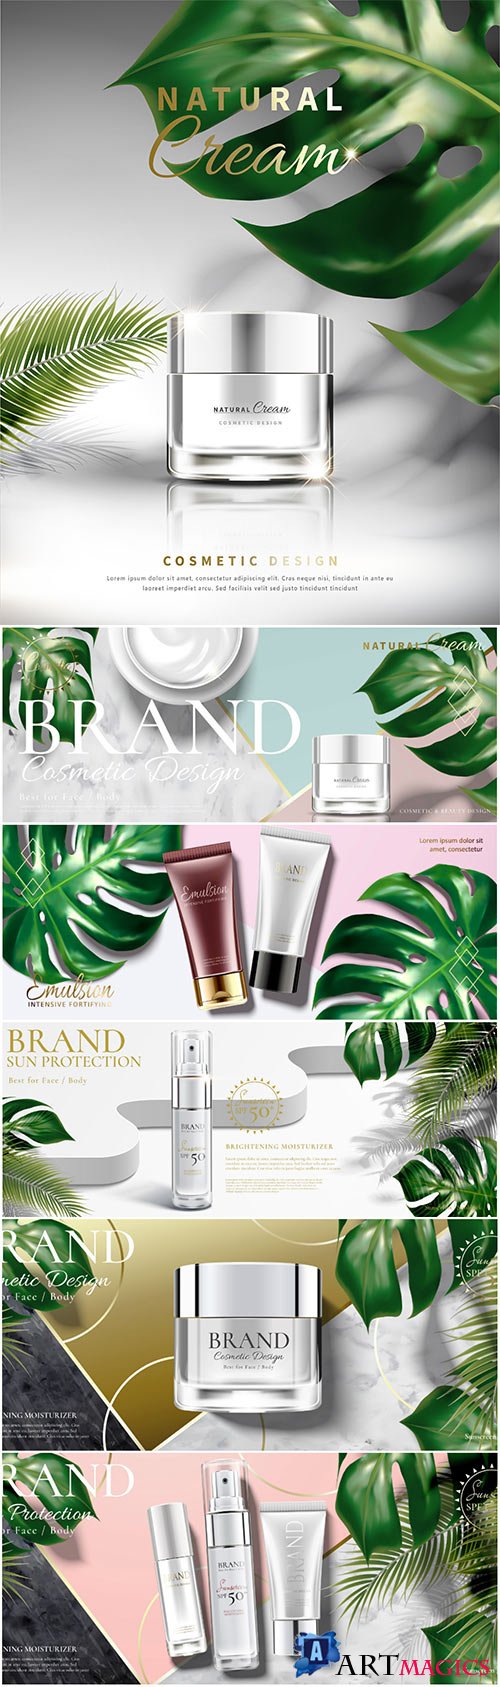 Cosmetic cream jar ads with tropical leaves in 3d illustration